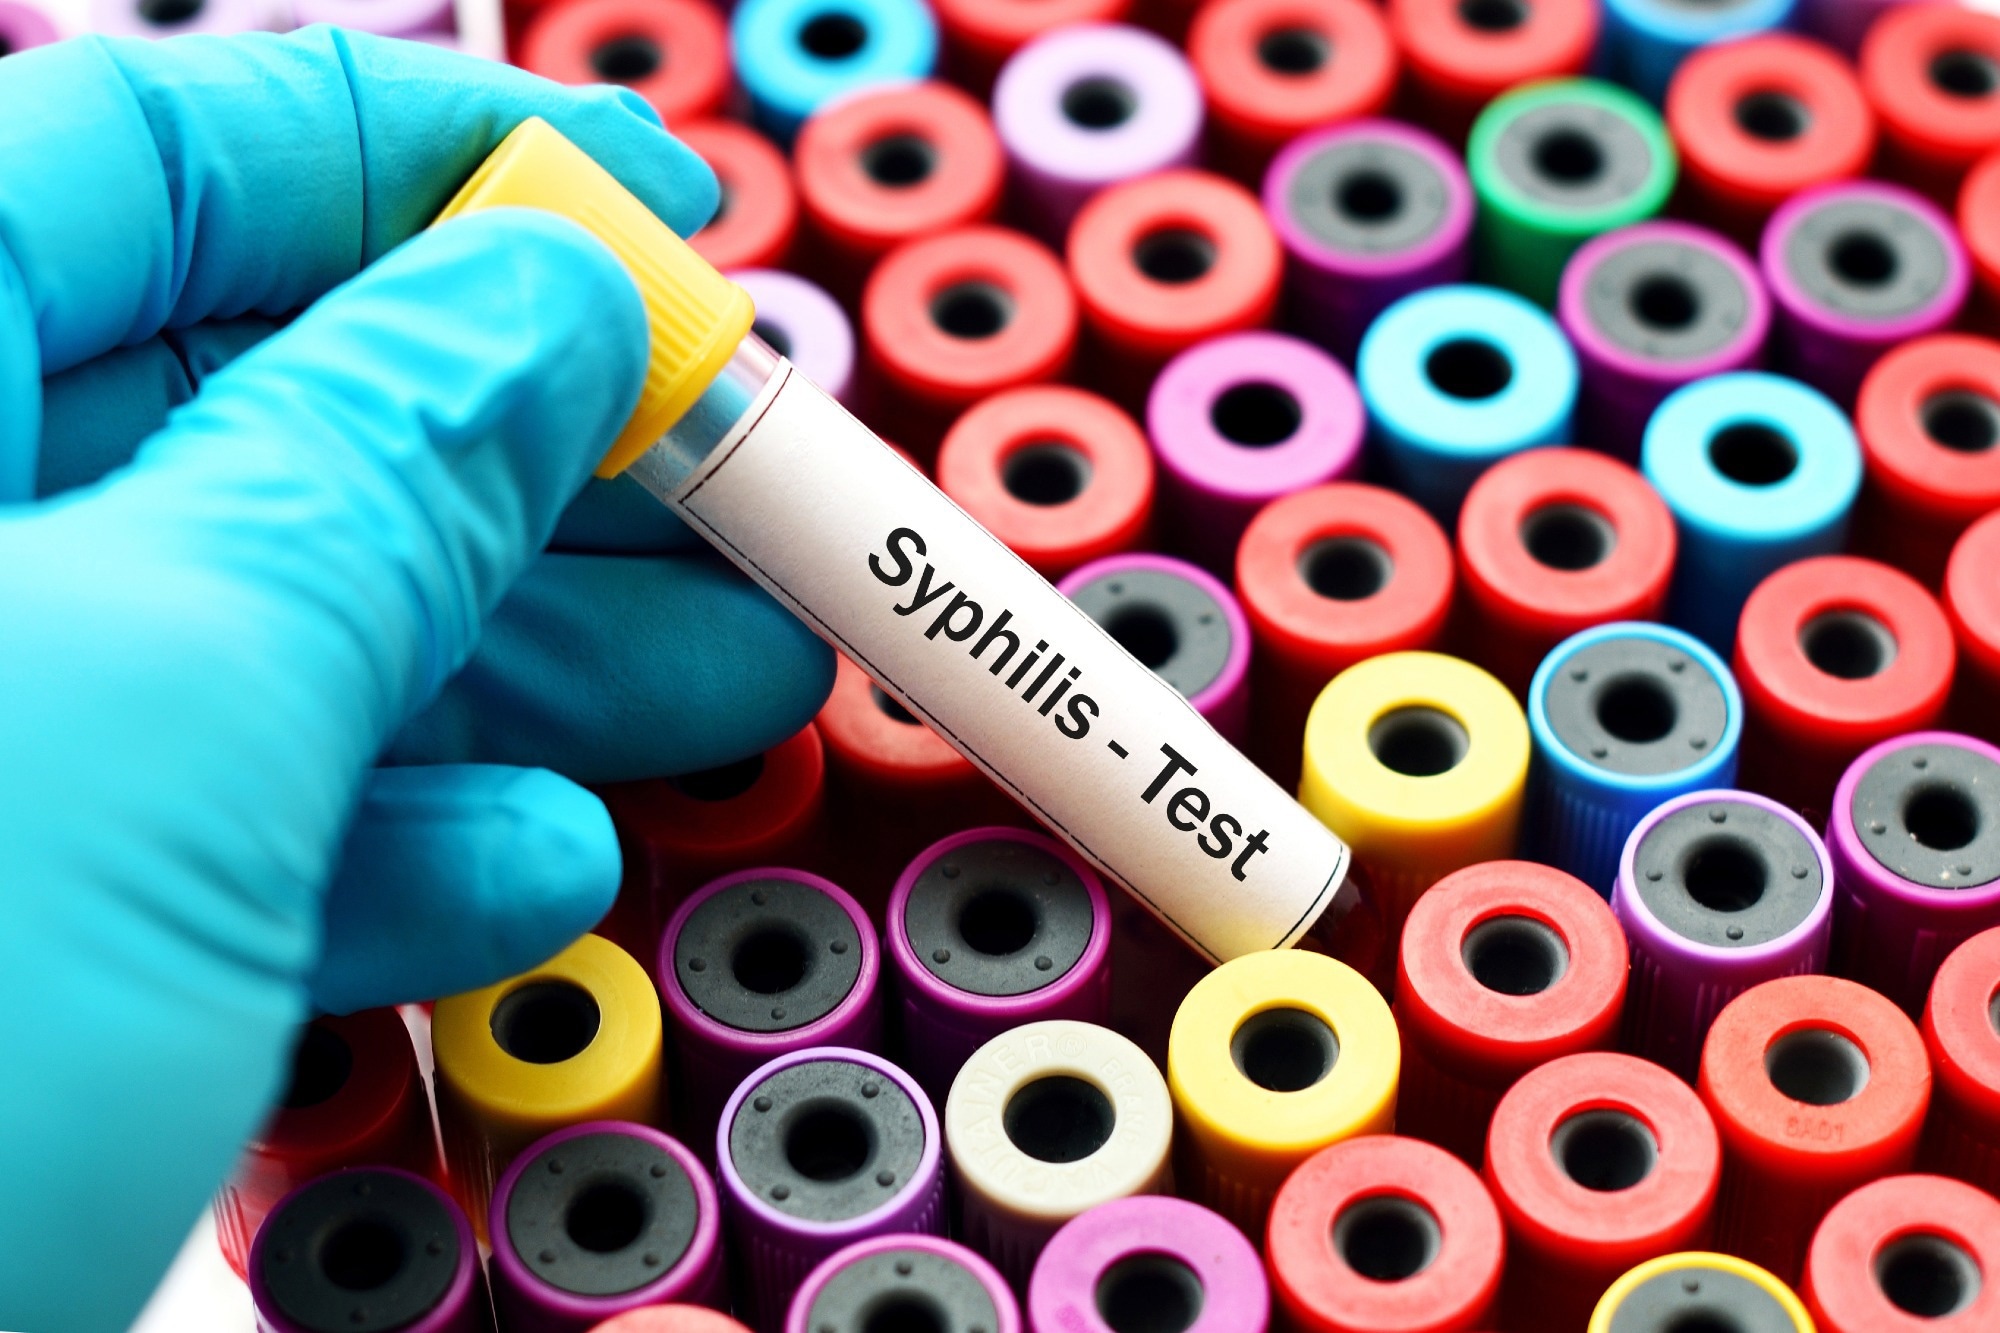 Study: The role of syphilis self-testing as an additional syphilis testing approach in key populations: a systematic review and meta-analysis. Image Credit: JarunOntakrai/Shutterstock.com